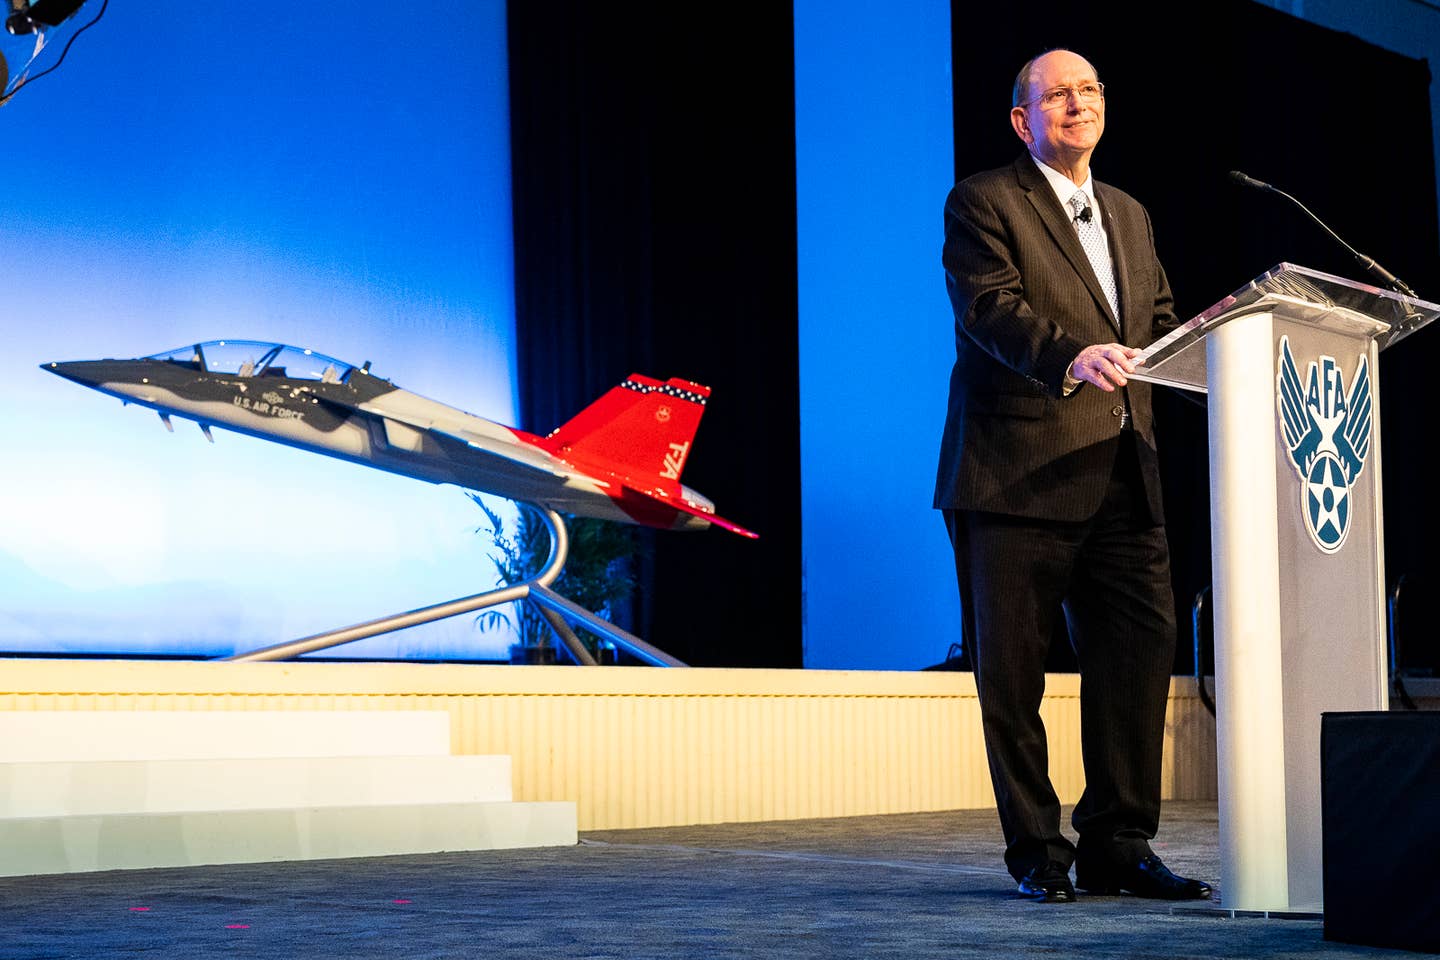 Acting Secretary of the Air Force Matthew P. Donovan reveals the name of the new Air Force trainer aircraft to be the T-7A Red Hawk during the Air Force Association Air, Space and Cyber Conference in National Harbor, Md., Sept. 16, 2019. (U.S. Air Force photo by Tech. Sgt. D. Myles Cullen)